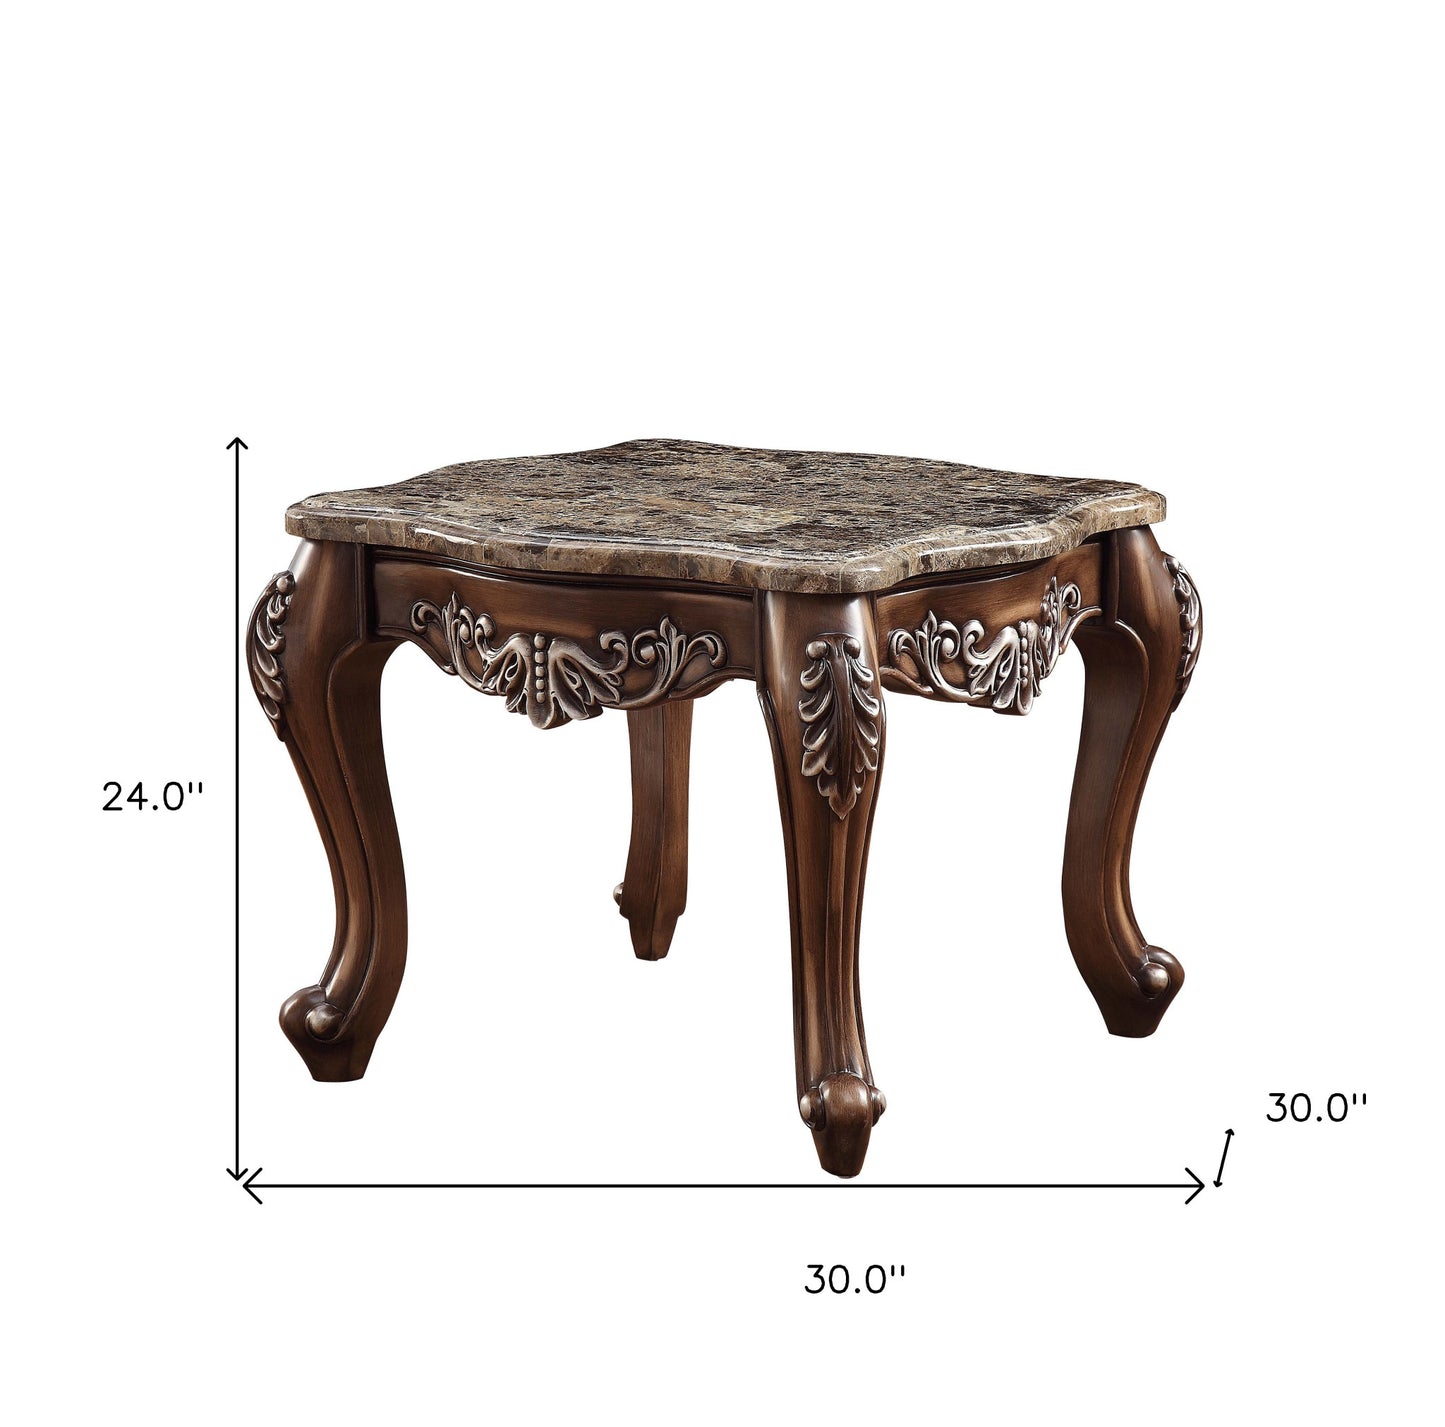 24" Antique Oak And Marble Square End Table By Homeroots